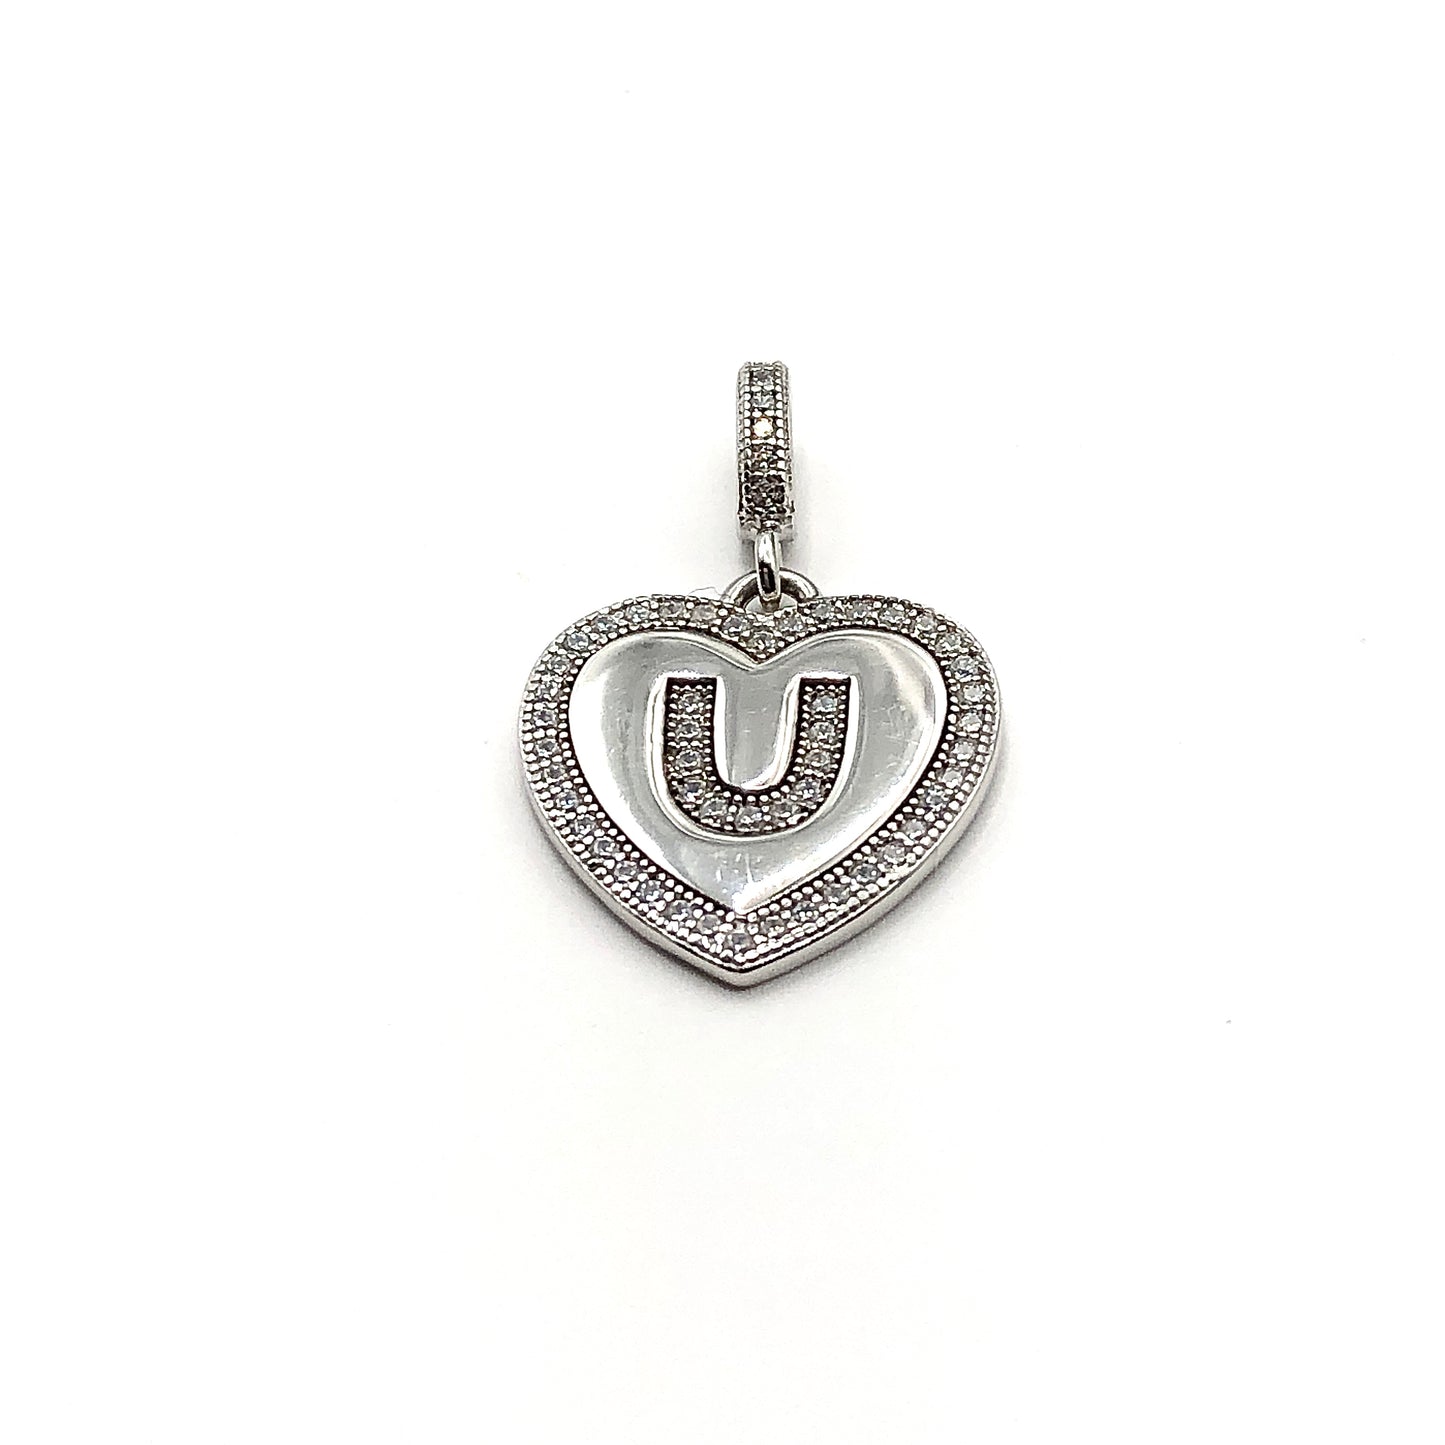 Statement Jewelry | Love You | Pre owned Sterling Cz Trimmed Heart Pendant | Silver Heart Charm